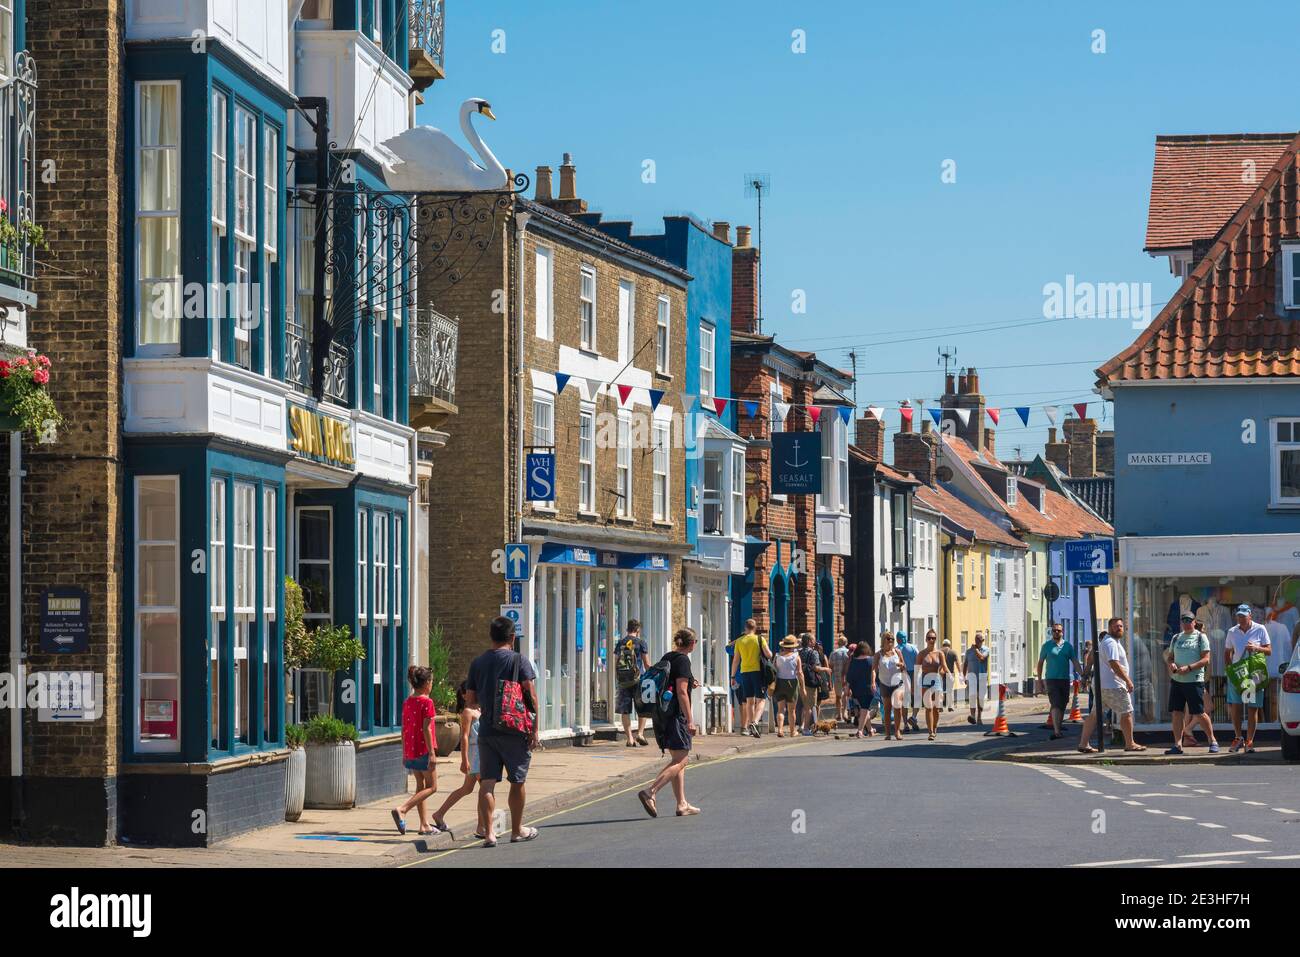 England high street, view of traditional shops and stores in the High Street in Southwold, Suffolk, England, UK Stock Photo